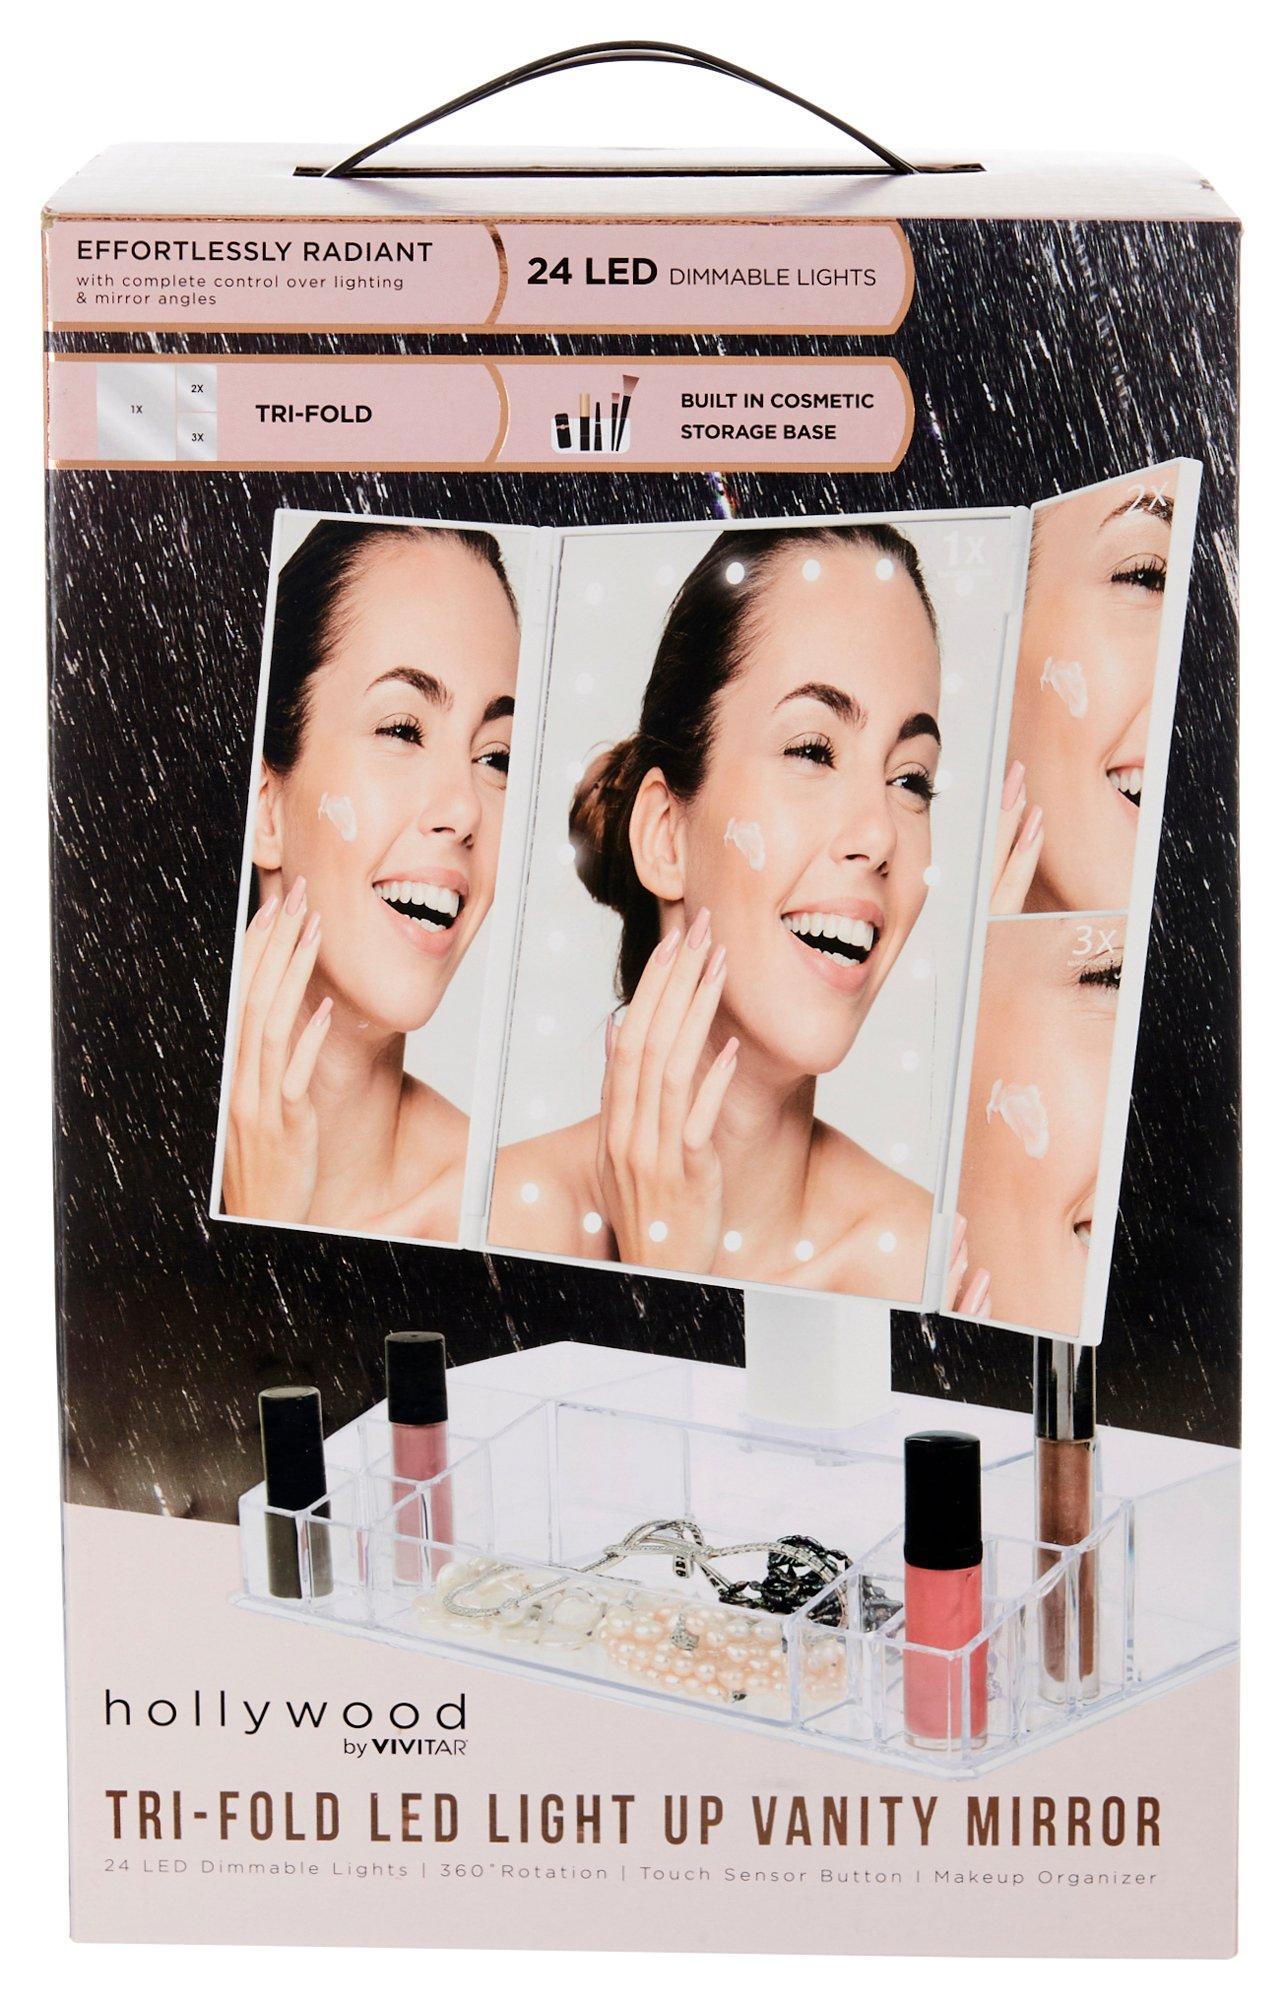 Hollywood TriFold LED Light Up Vanity Mirror